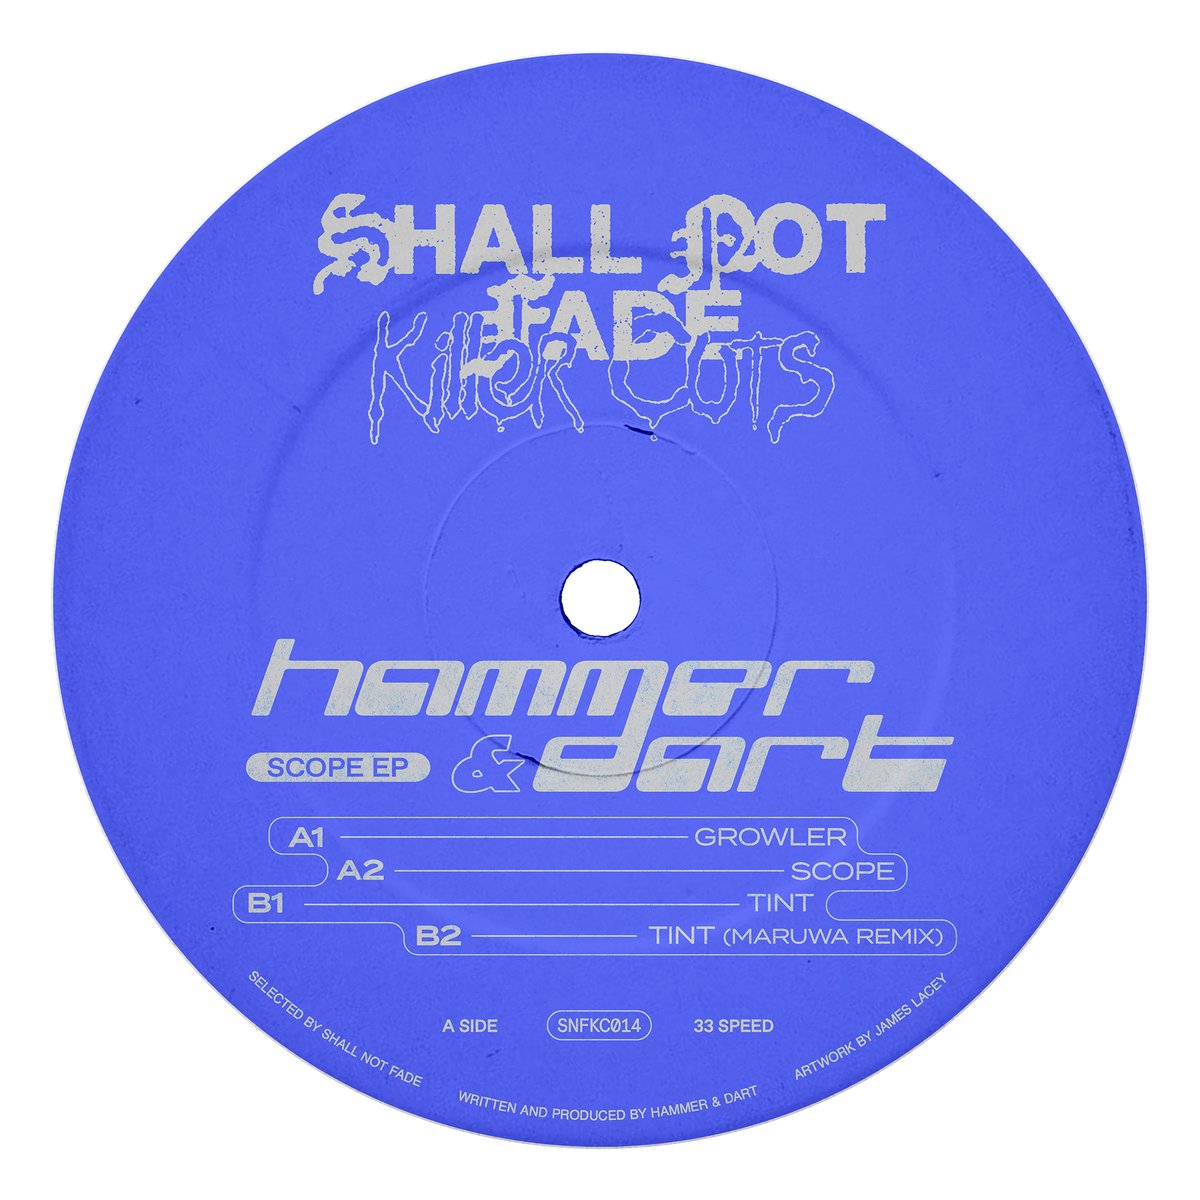 Joining forces with DART for our Scope EP on Shall Not Fade: shallnotfade.co.uk/album/scope-ep @shallnot_fade @darttrax